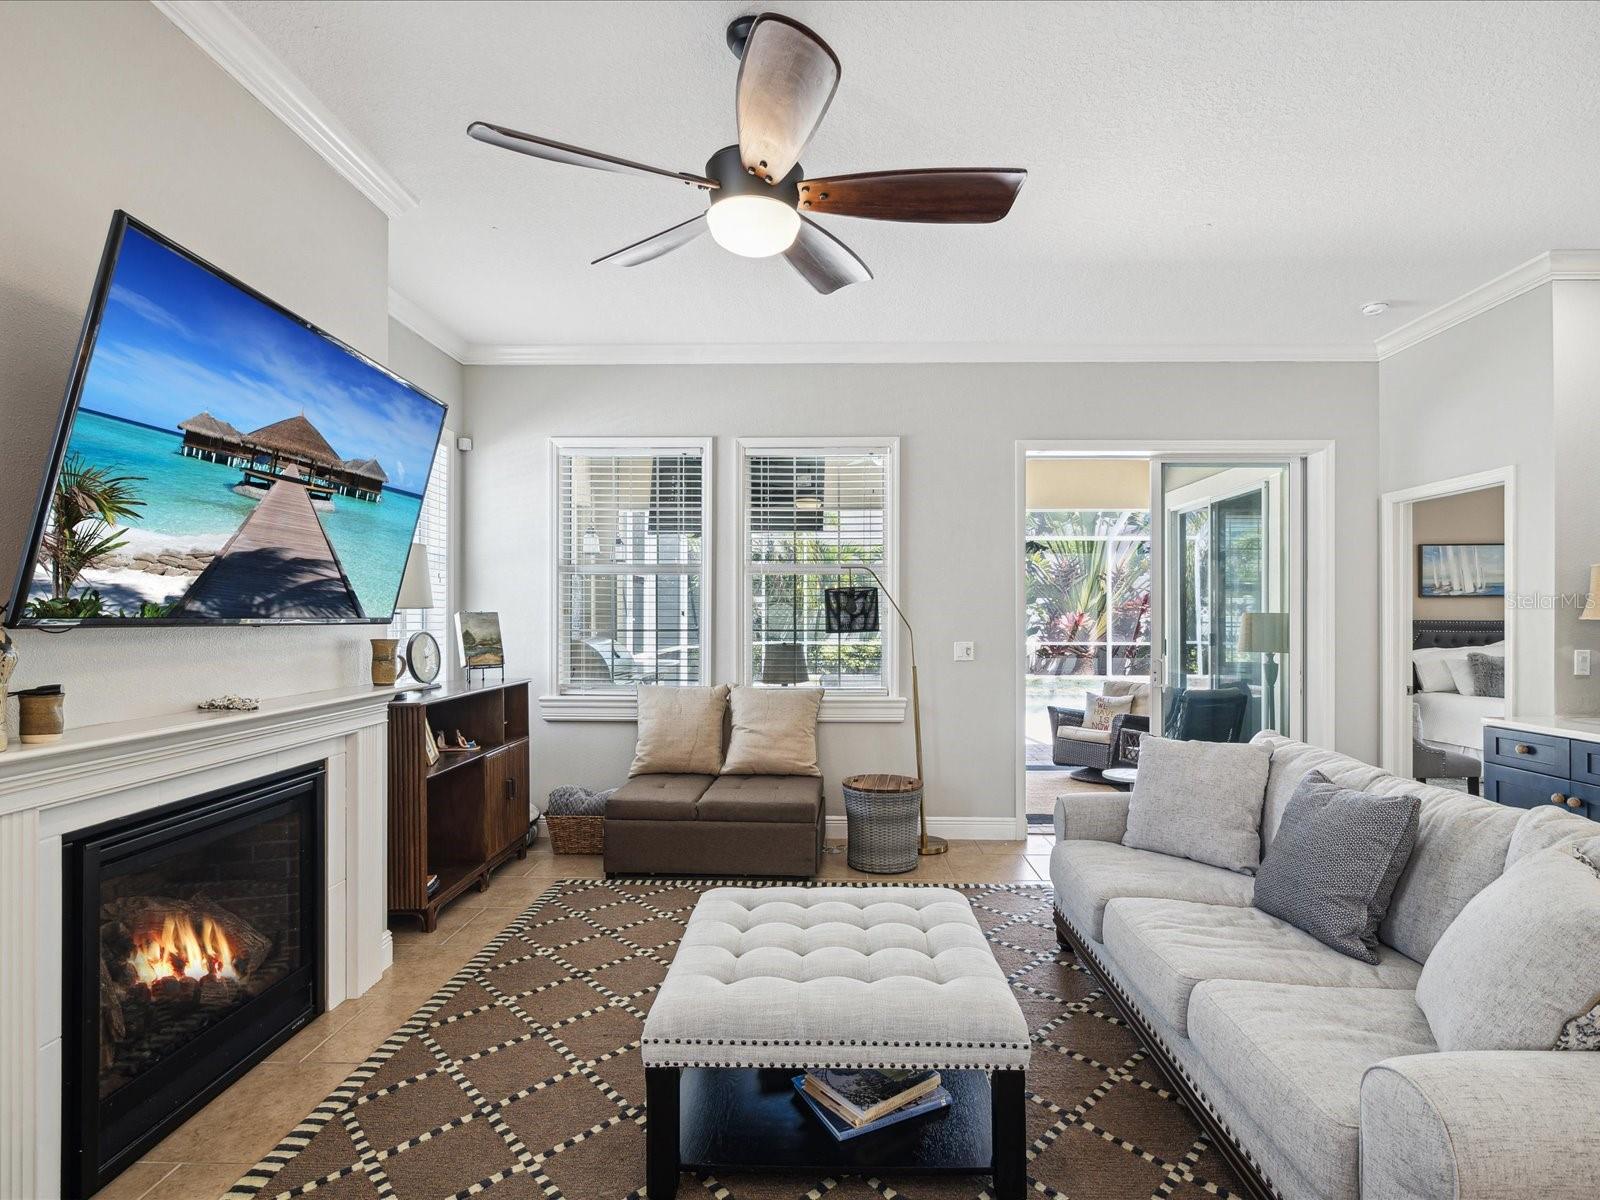 The living area features a working gas fireplace and lots of windows for natural light.